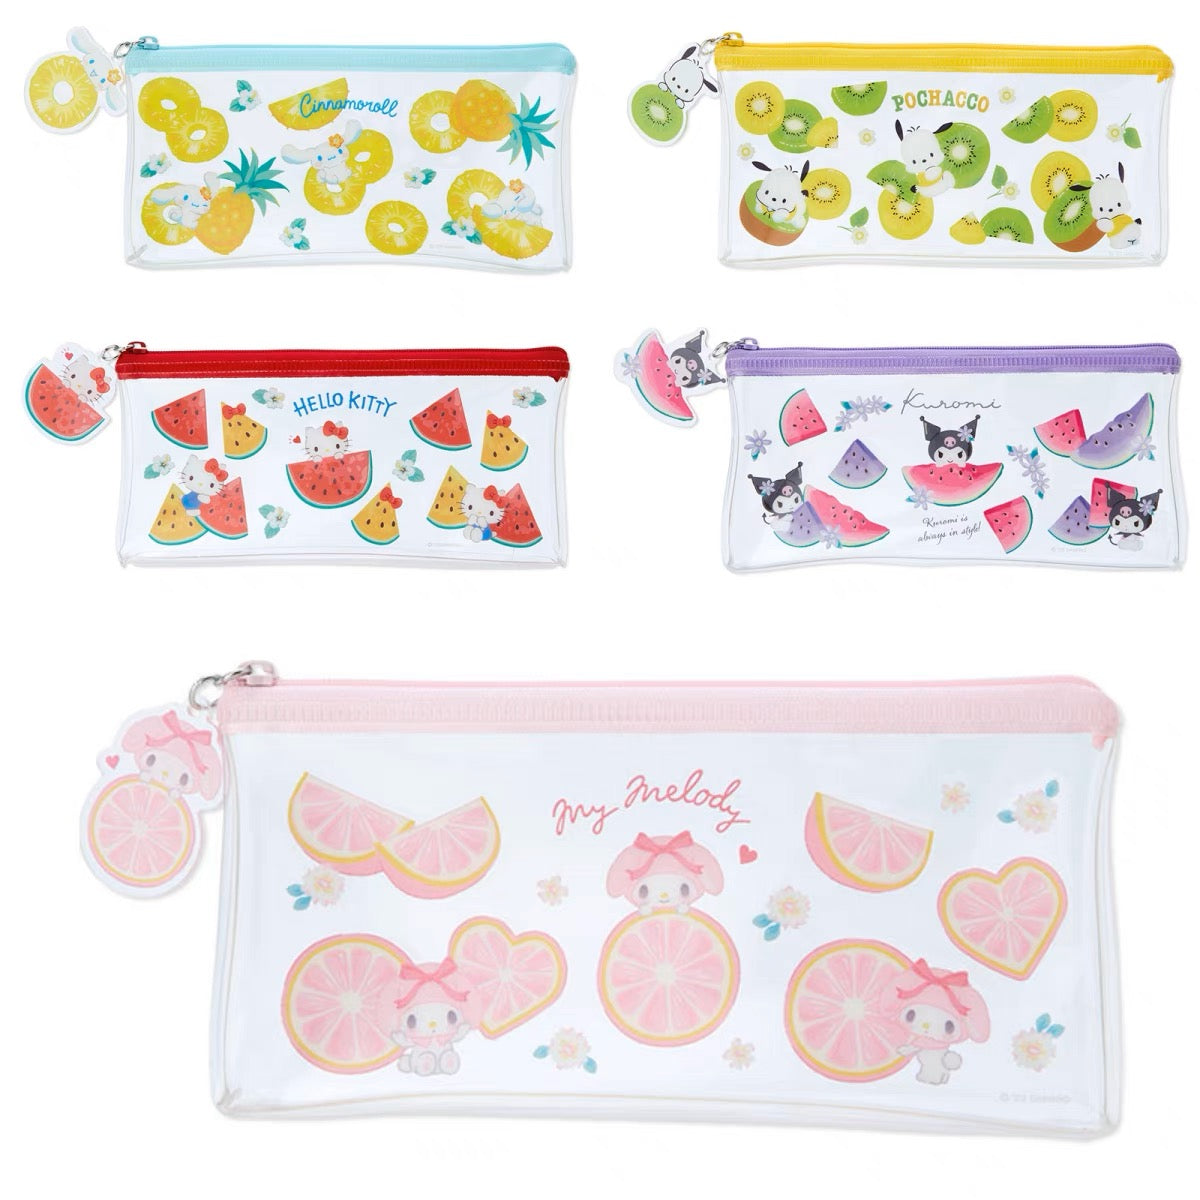 NEW Sanrio Cinnamoroll Clear Pen Pouch Pencil Case Stationery Storage Case